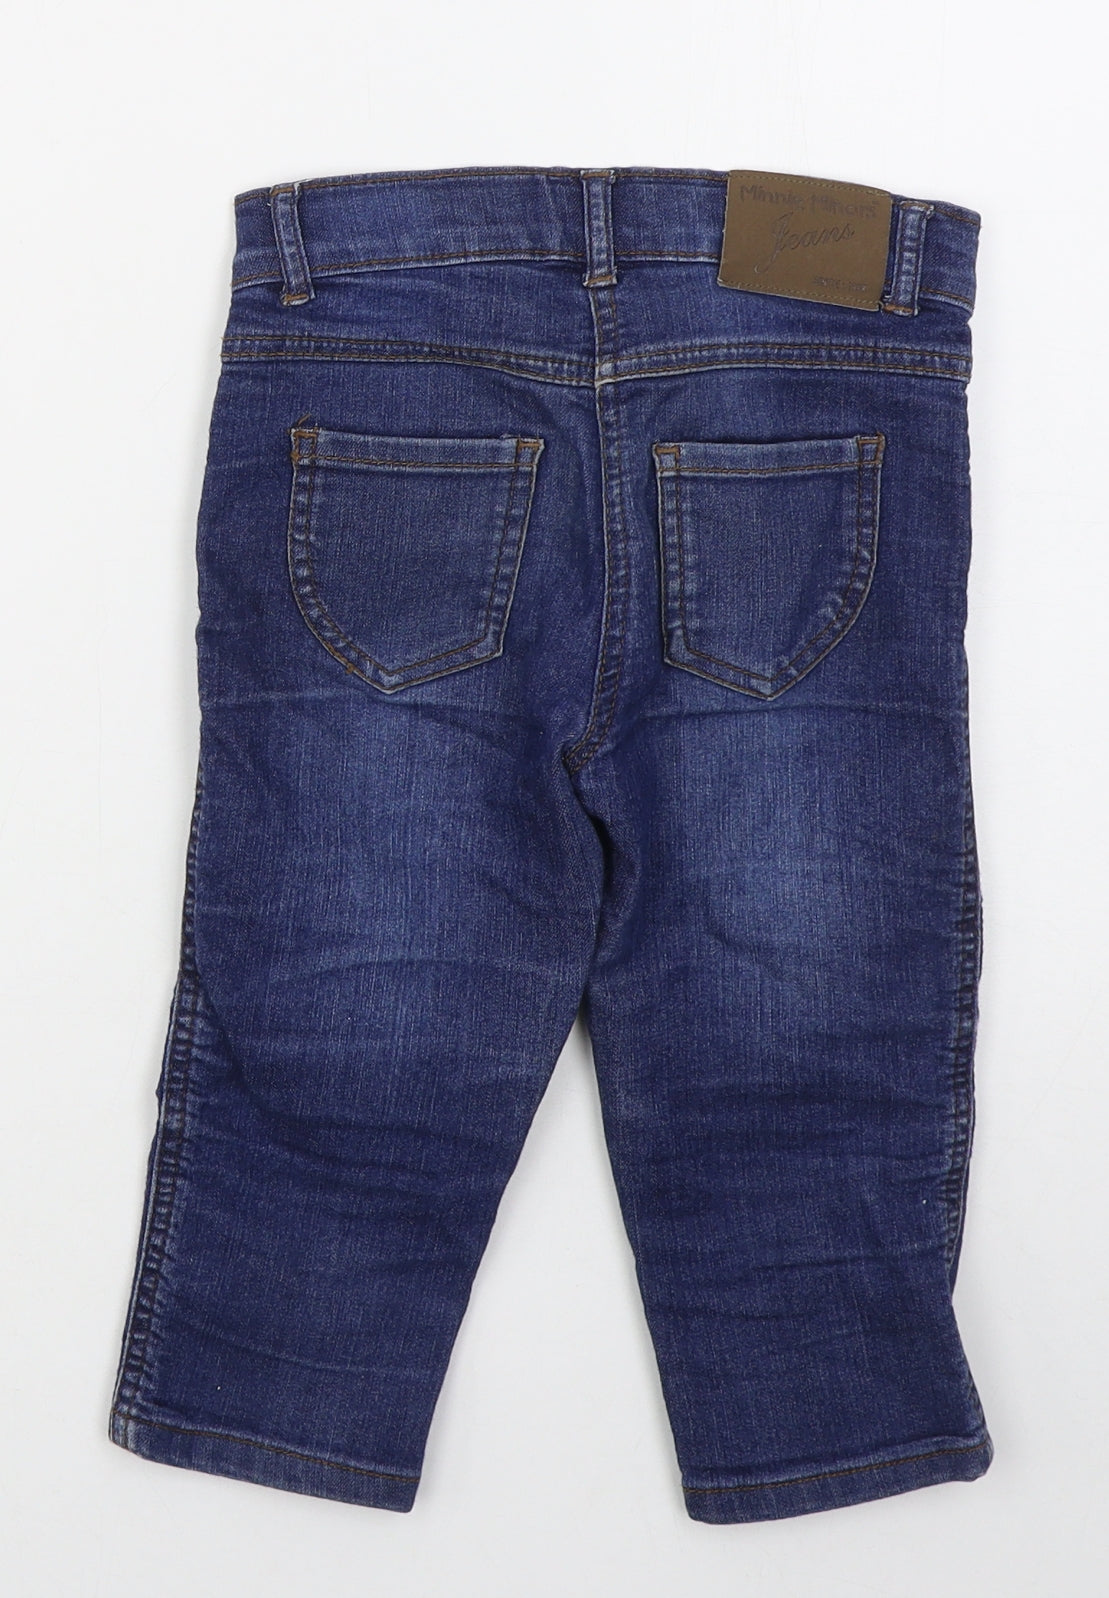 Minnie Minors Girls Blue  Cotton Straight Jeans Size 5 Years  Regular Button